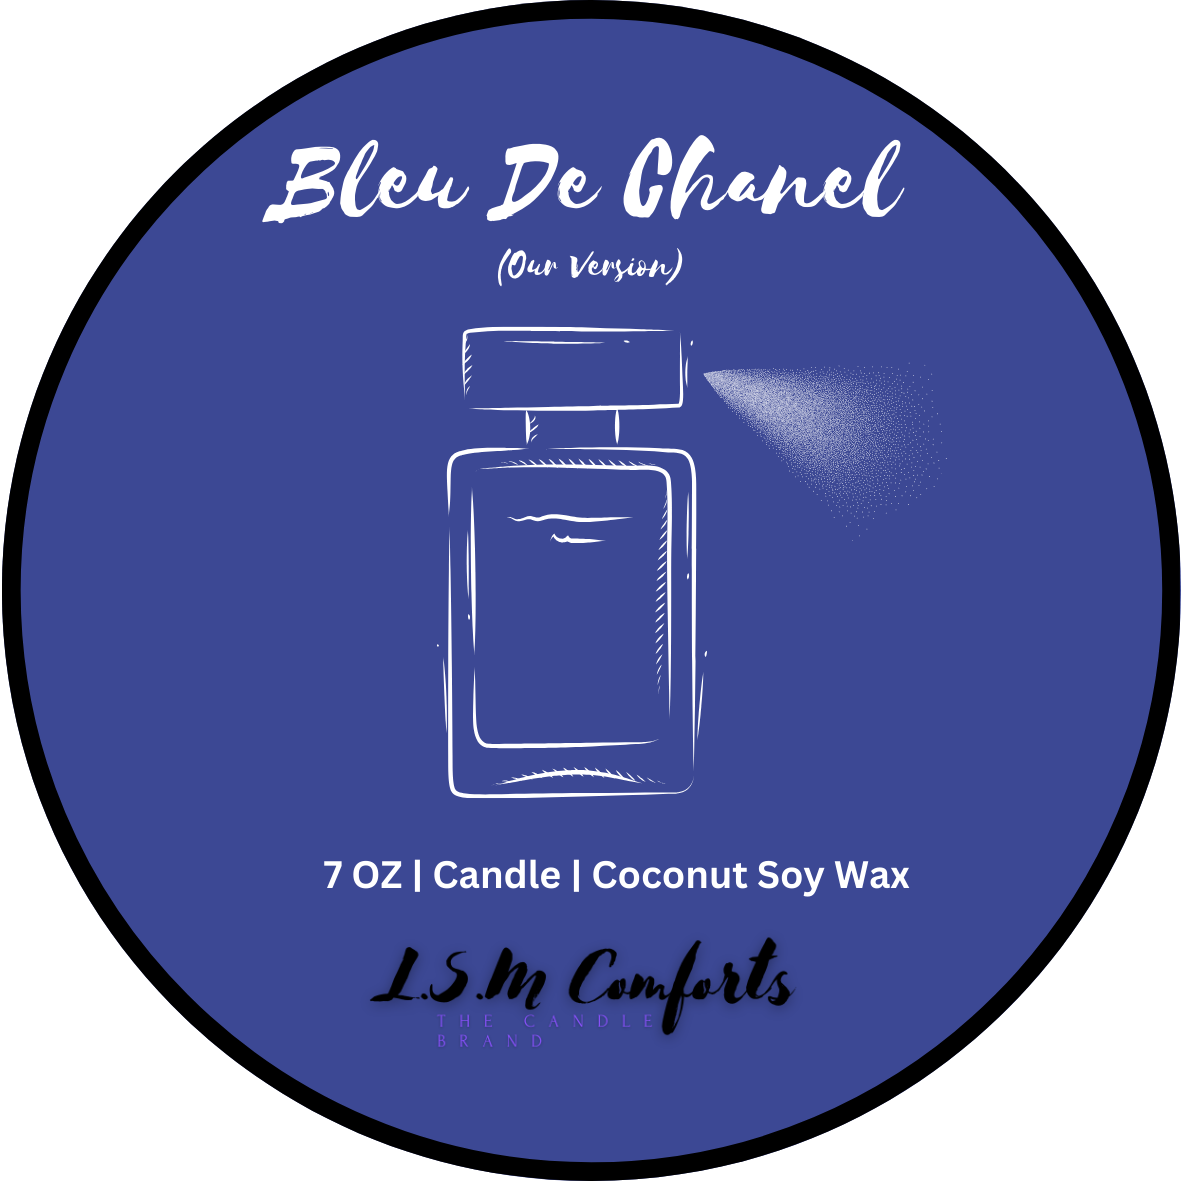 Luxe Bleu De Chanel Scented Candle (Our Version)